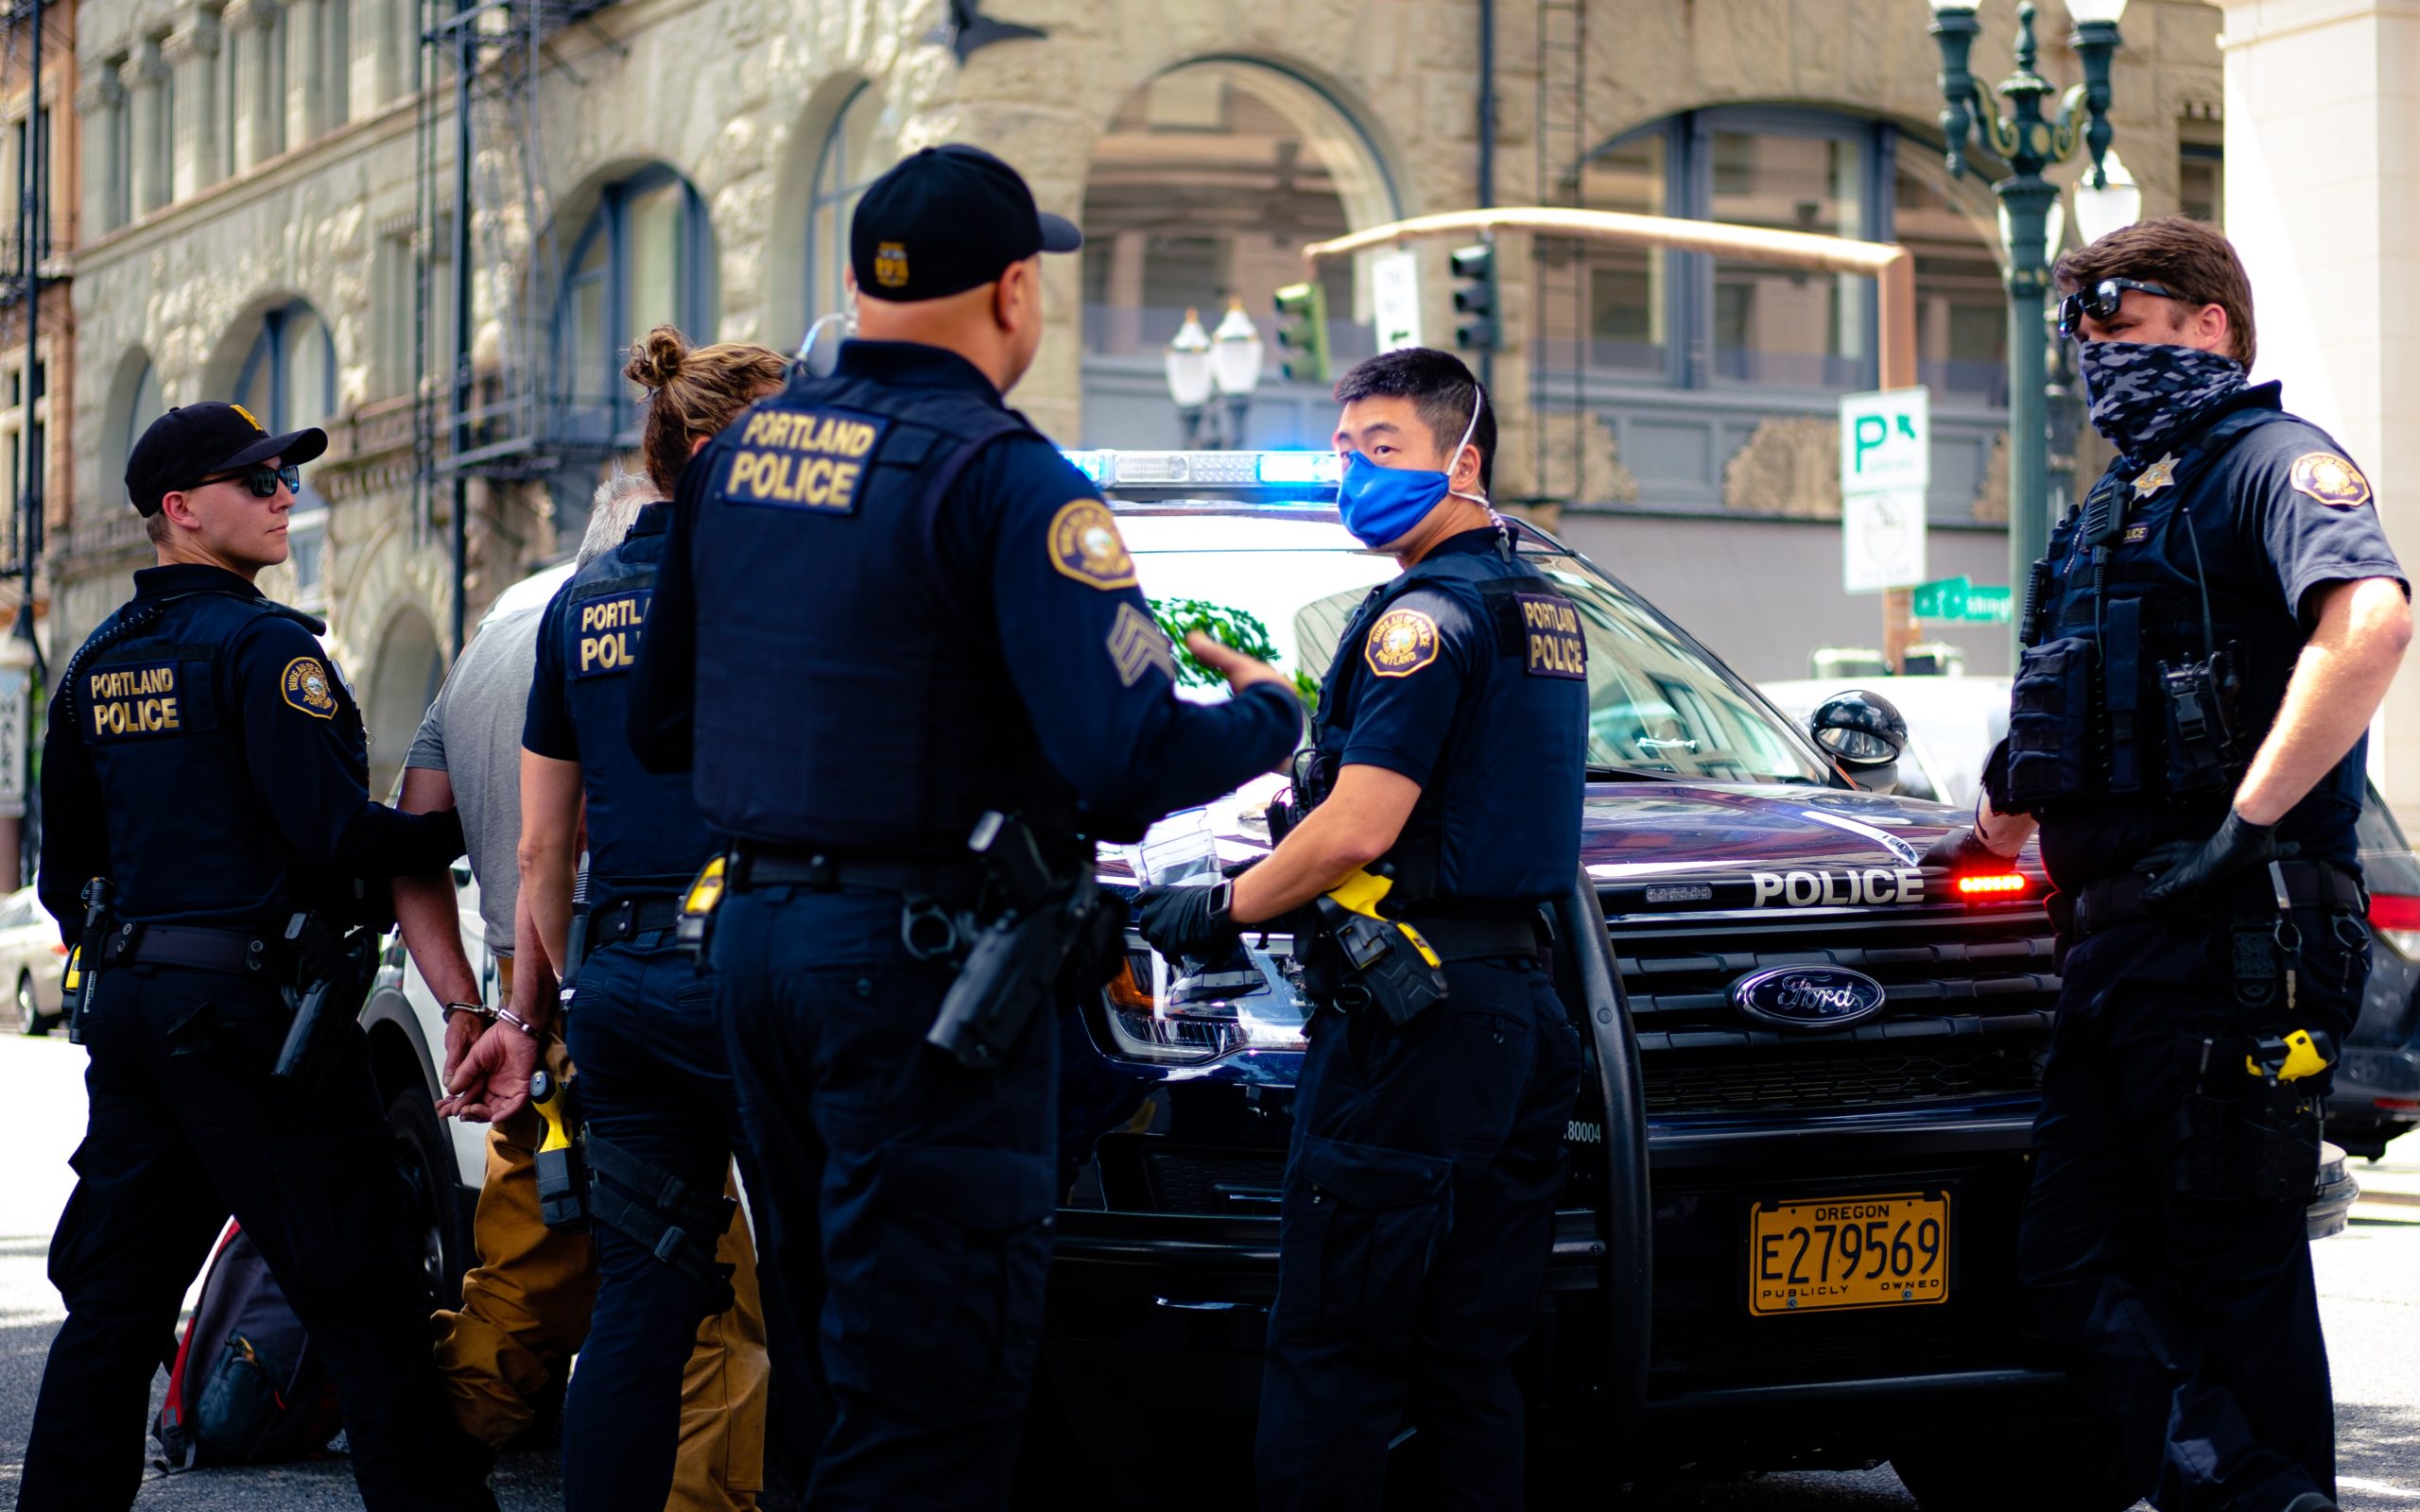 Can Active Bystander Training Reduce Police Misconduct?